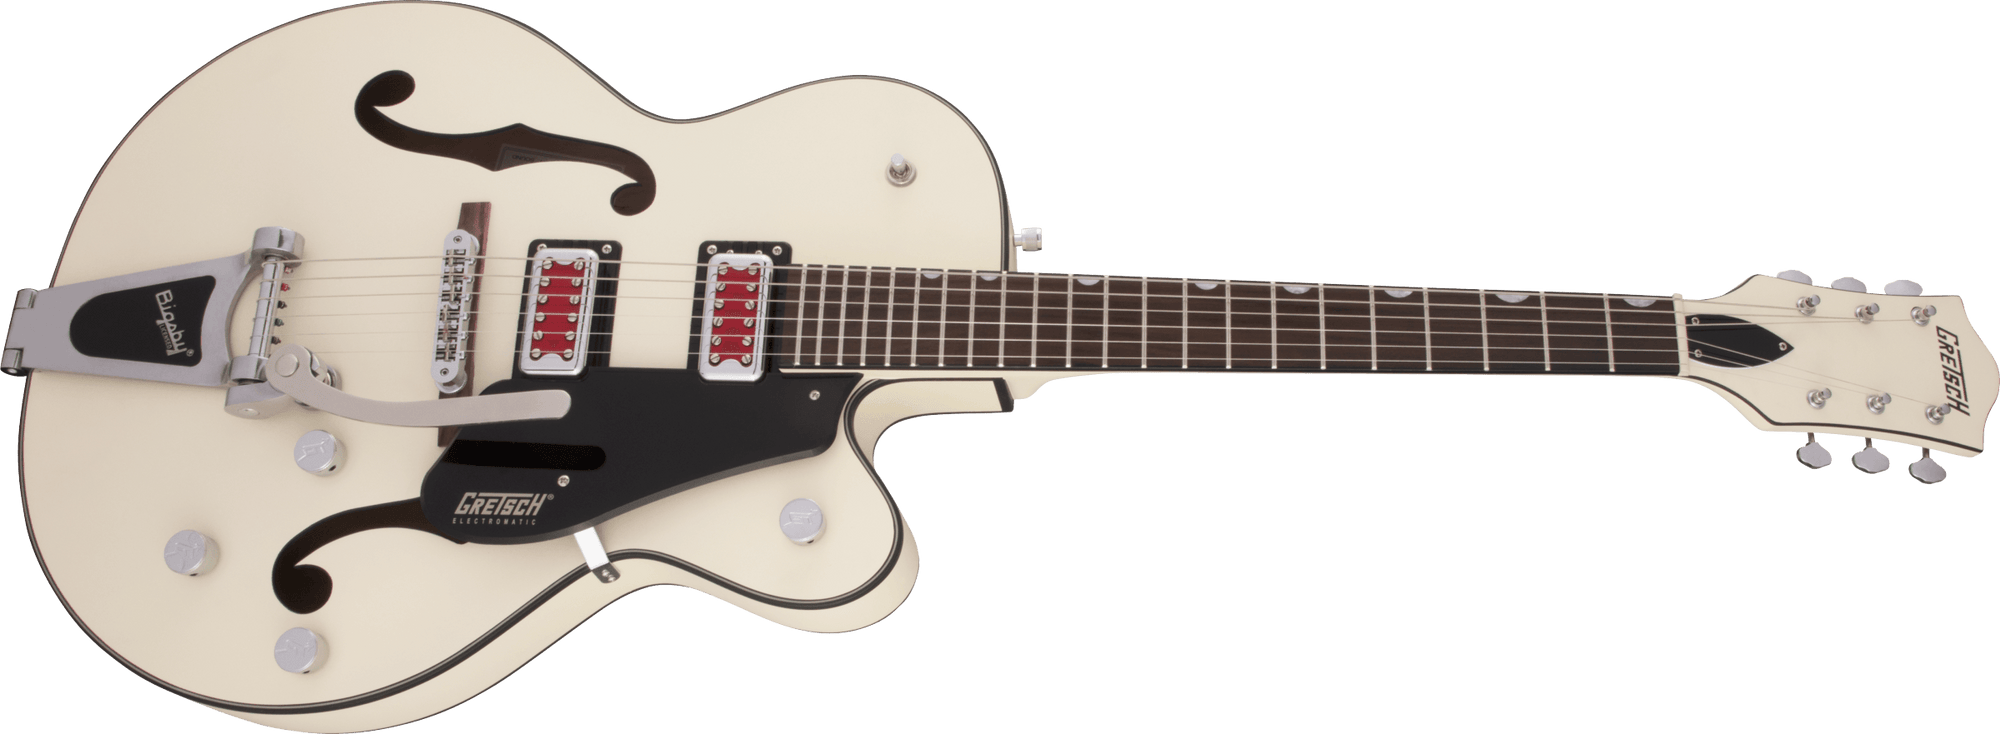 G5410T Electromatic "Rat Rod", Matte Vintage White, Hollow Body Single-Cut with Bigsby, RW FB